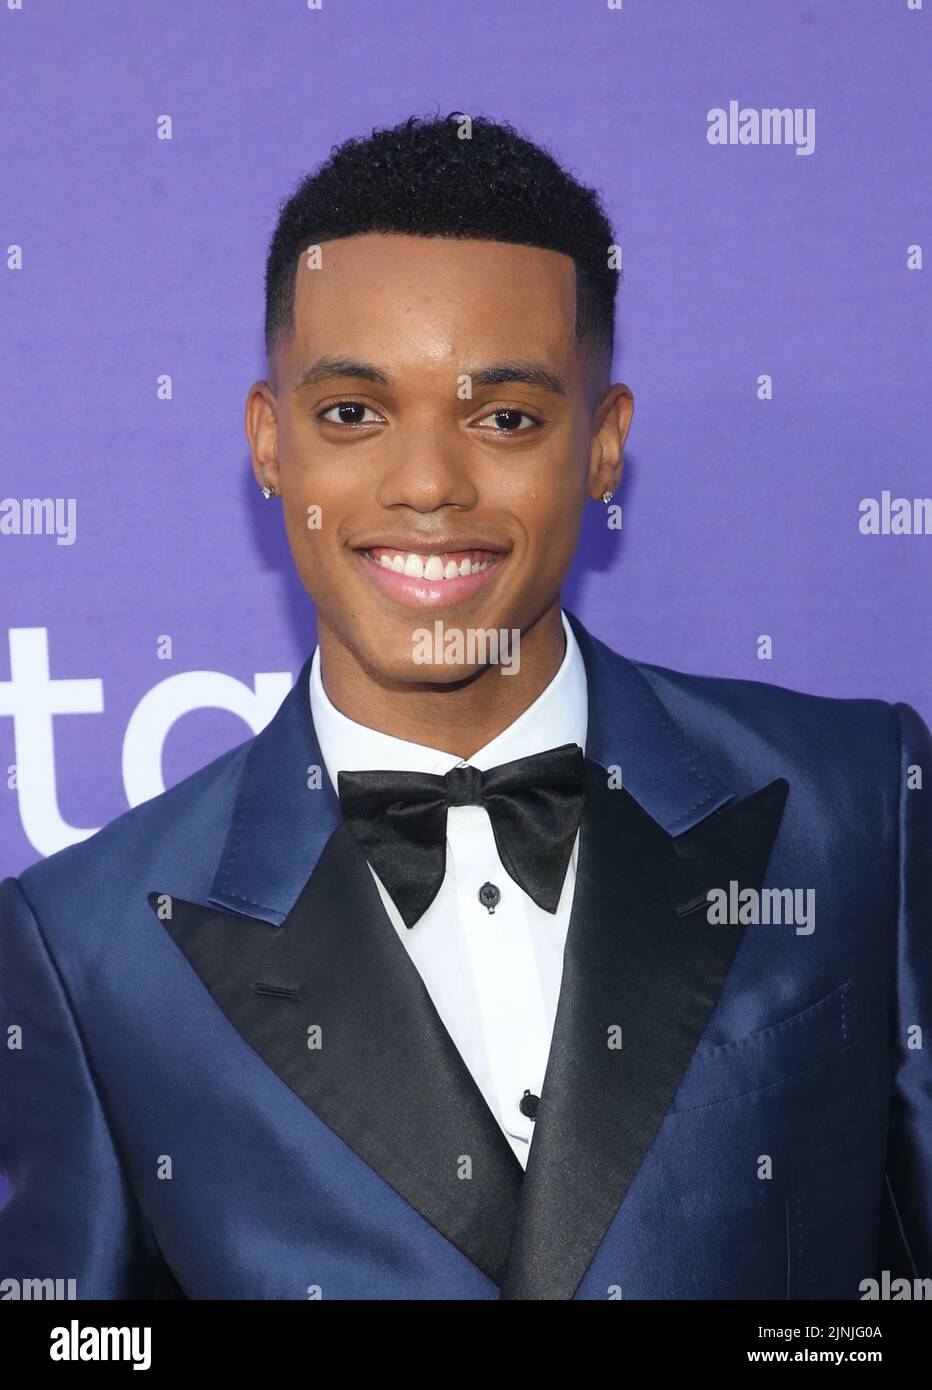 Los Angeles, California, USA. 11th Aug, 2022. Jabari Banks. Variety's 2022 Power Of Young Hollywood Celebration Presented By Facebook Gaming held at Neuehouse Hollywood in Los Angeles. Credit: AdMedia Photo via/Newscom/Alamy Live News Stock Photo